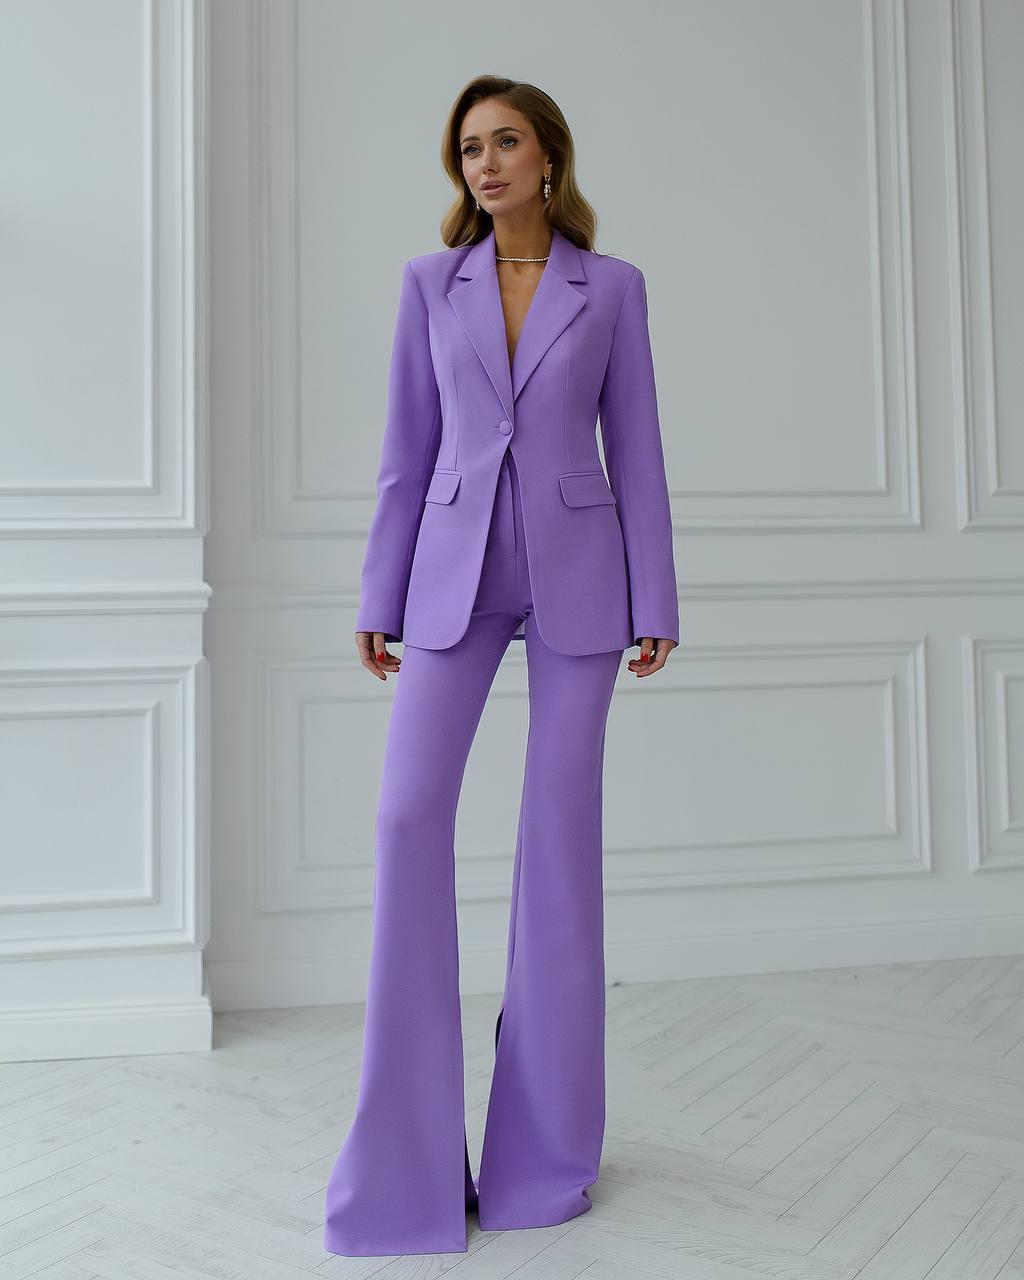 a woman in a purple suit stands in a white room